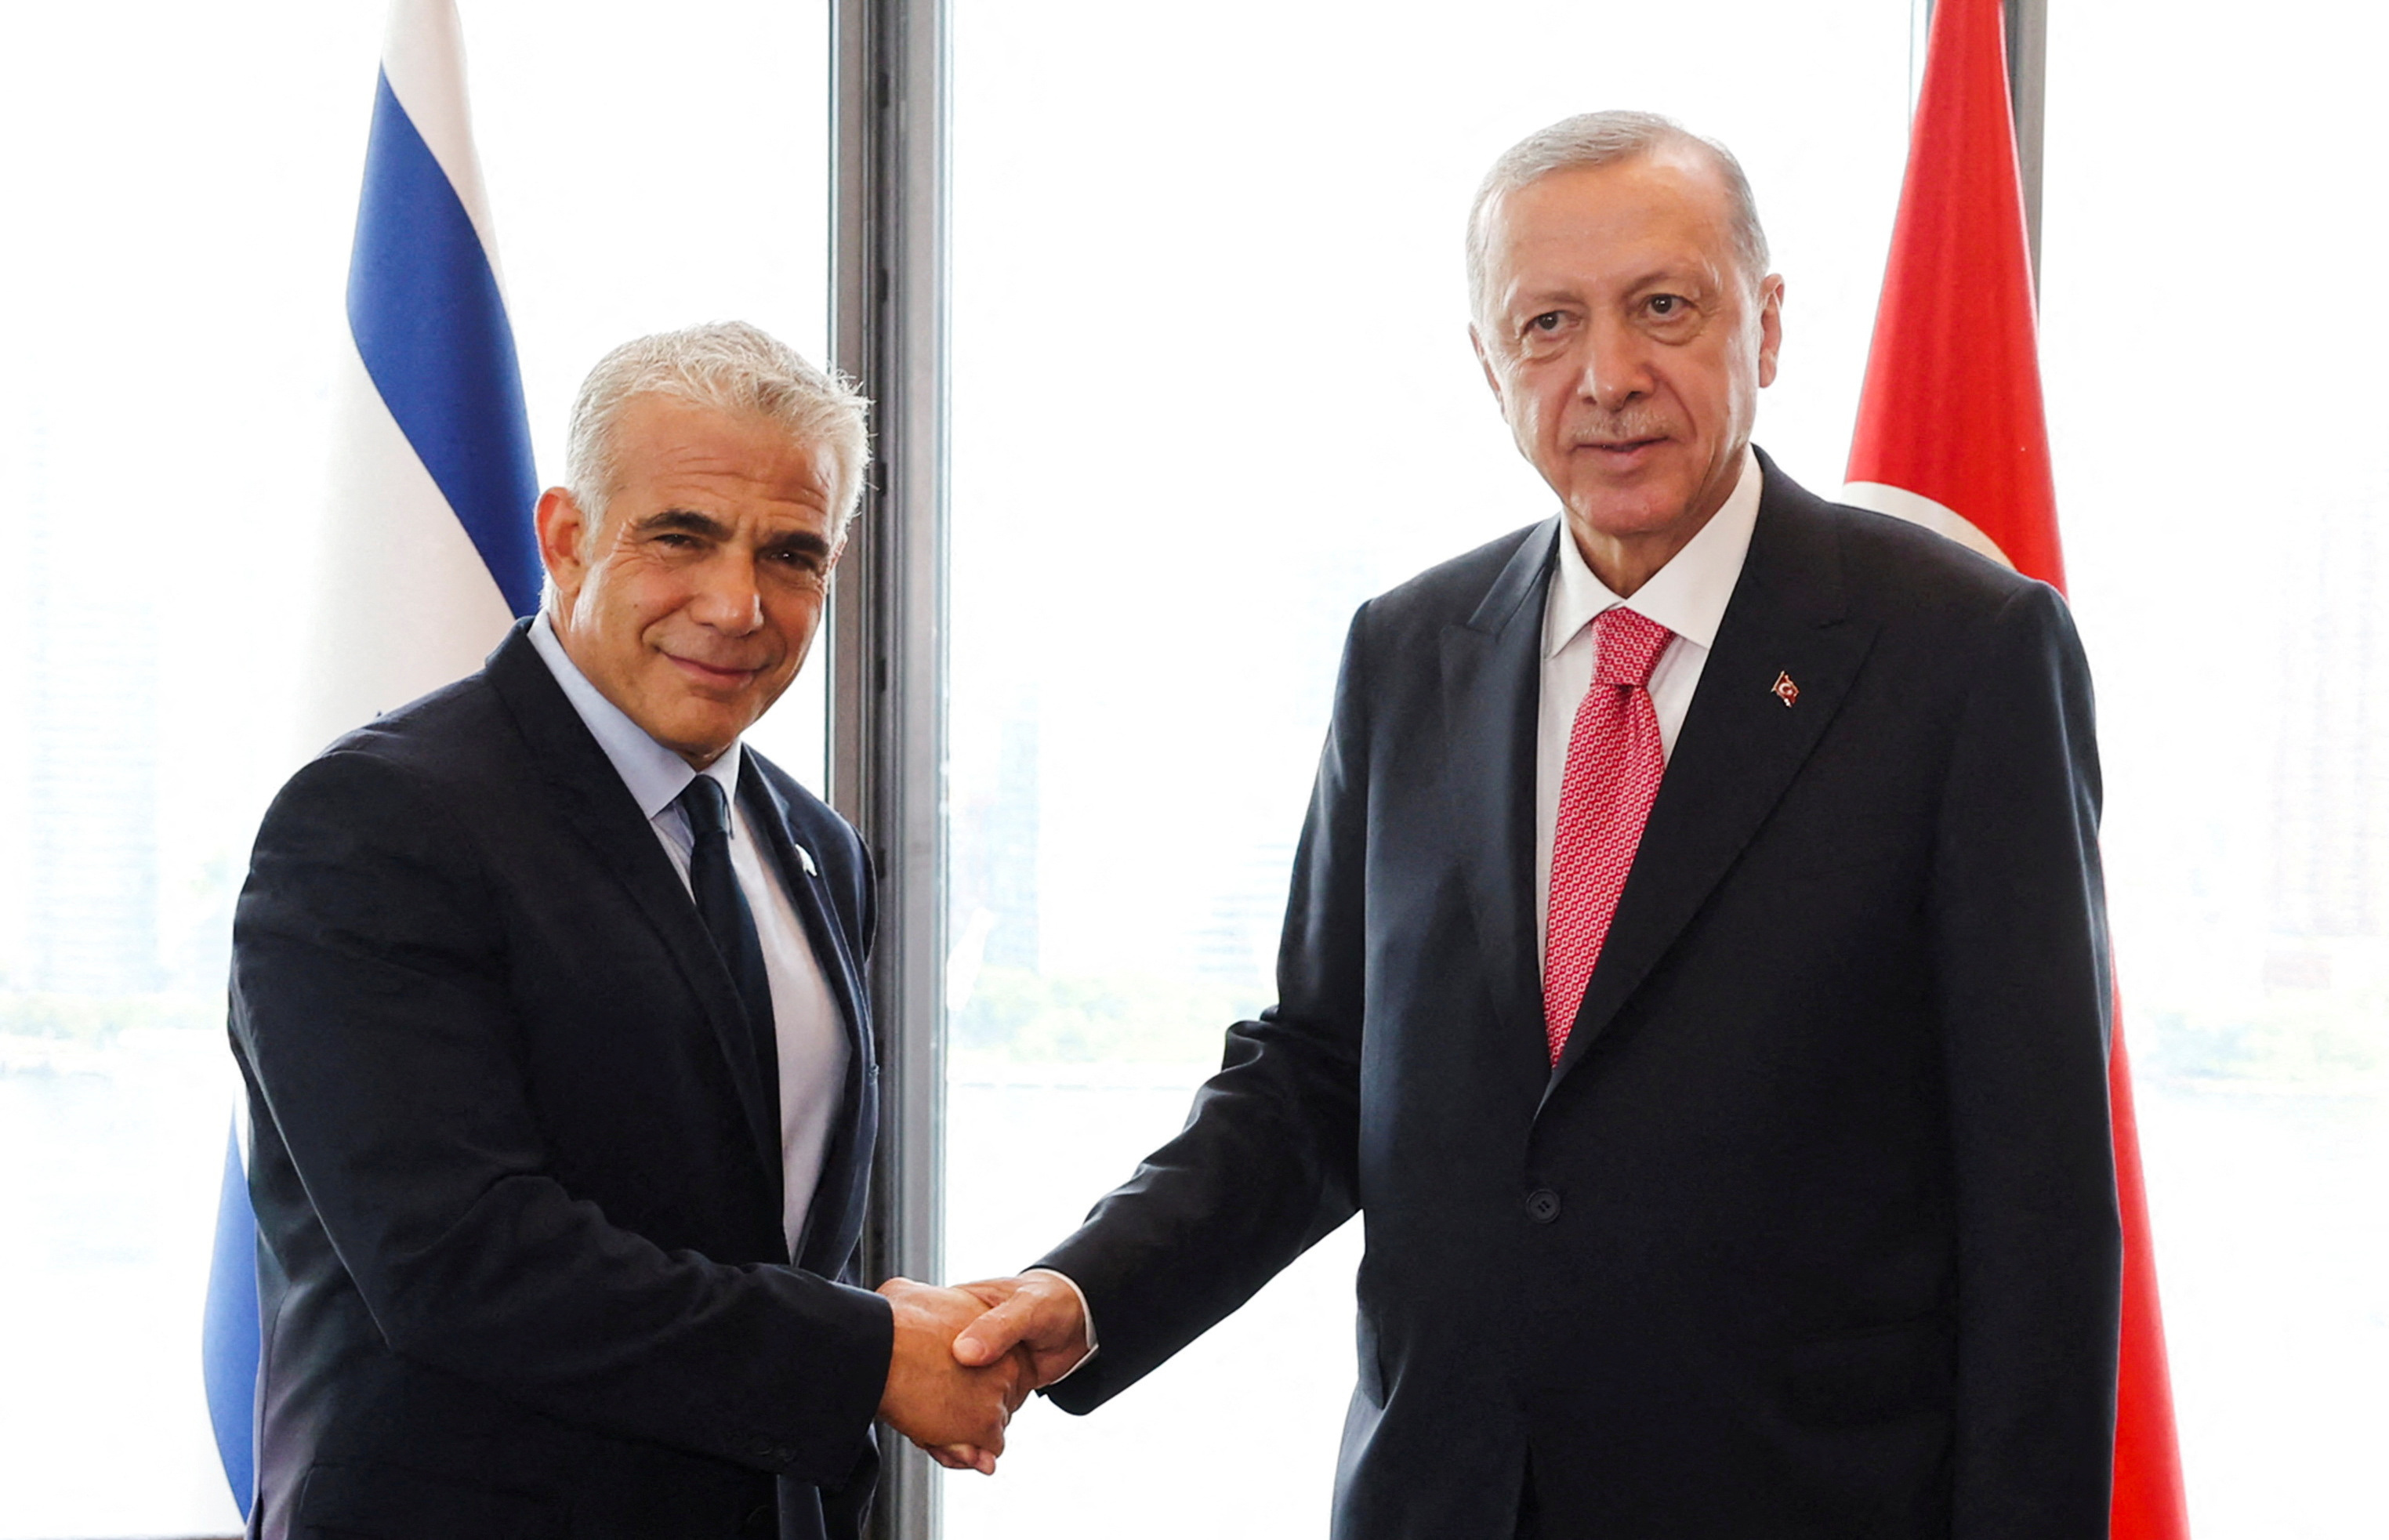 Israeli PM Lapid and Turkish President Erdogan met on the sidelines of the U.N. General Assembly